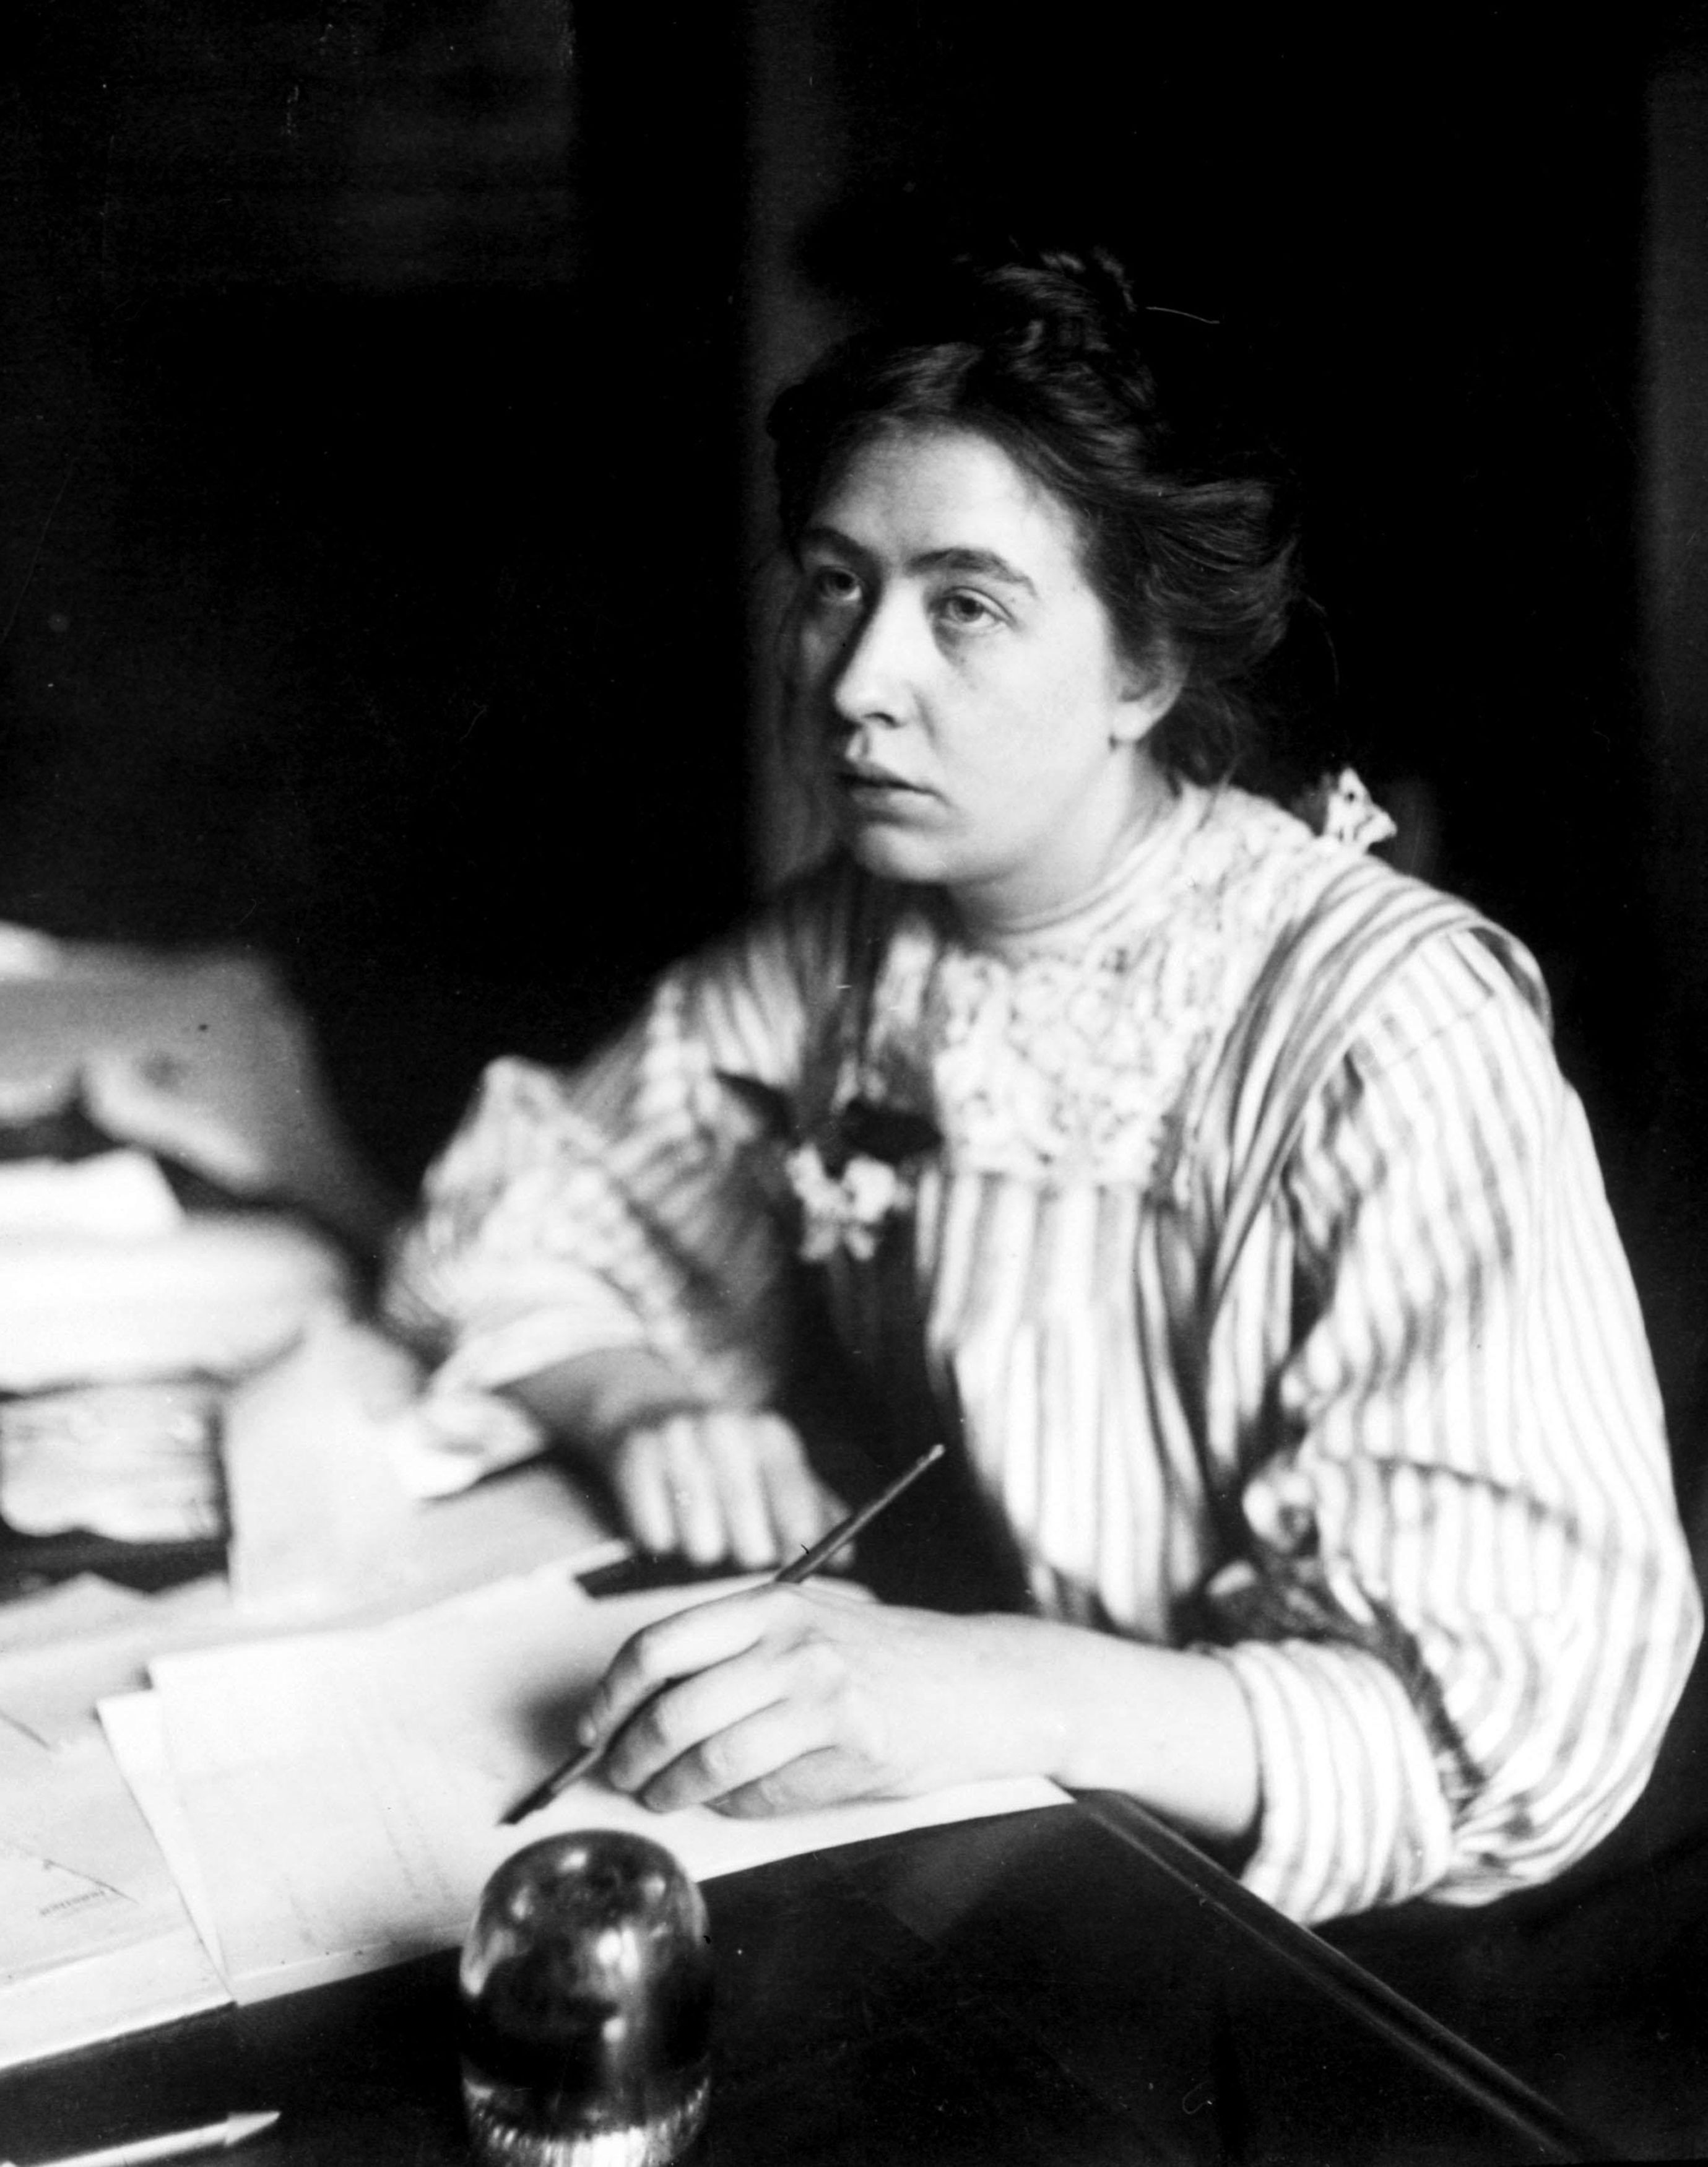 Suffragette Sylvia Pankhurst, who was one of Emmeline Pankhurst's three daughters, at her desk in 1911 (PA)